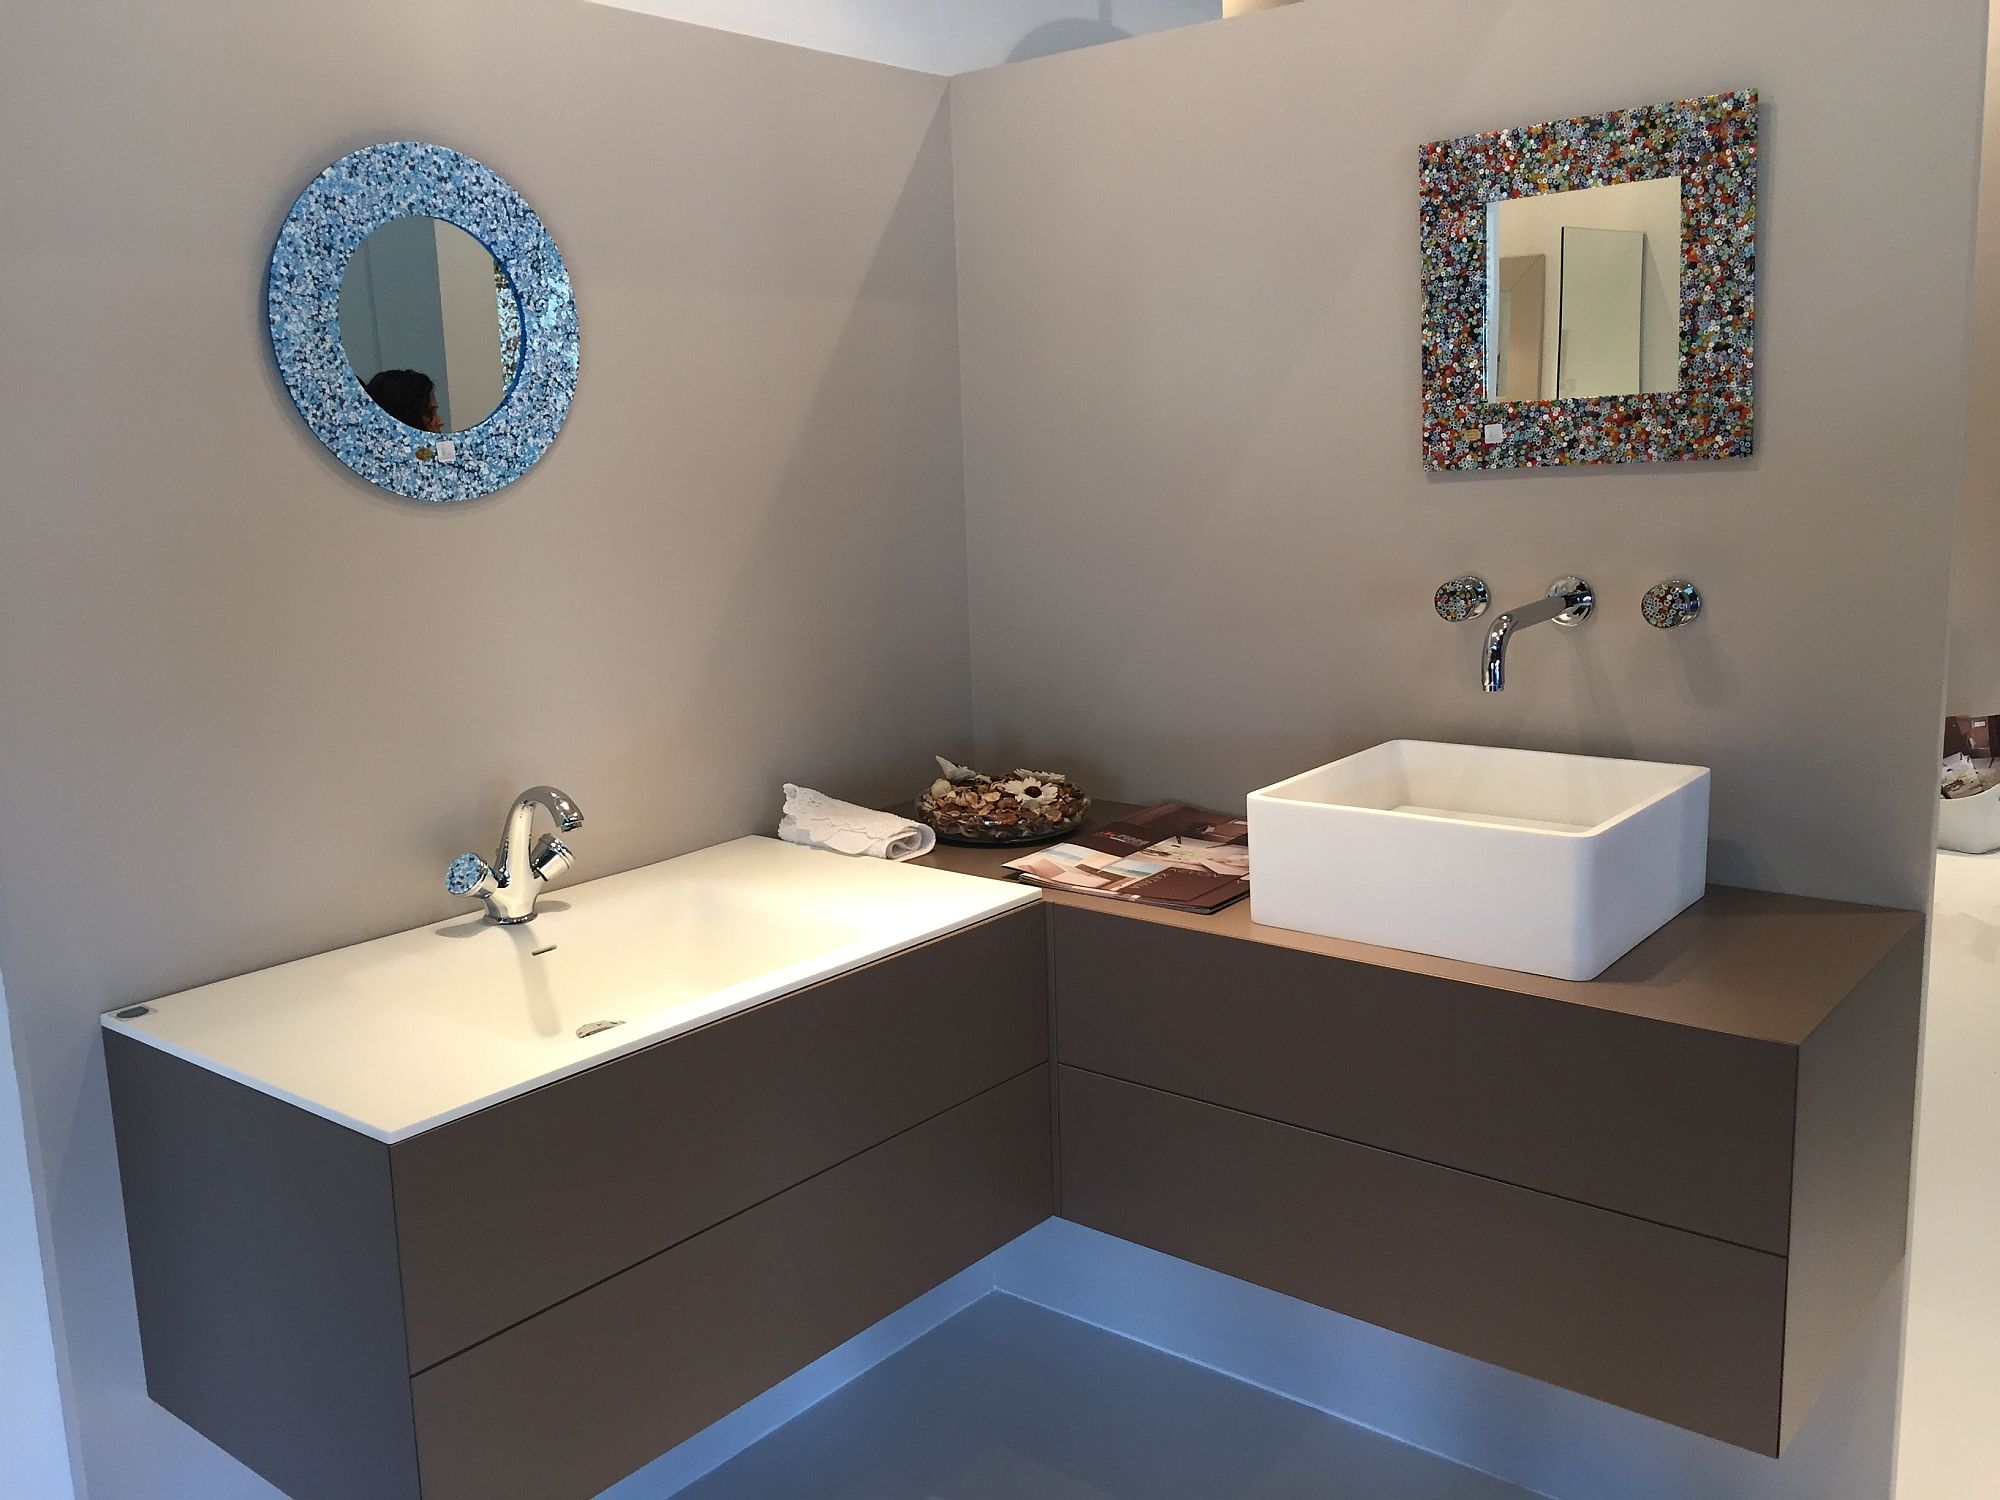 Colorful-and-invetive-mirror-frames-enliven-the-contemporary-bathroom